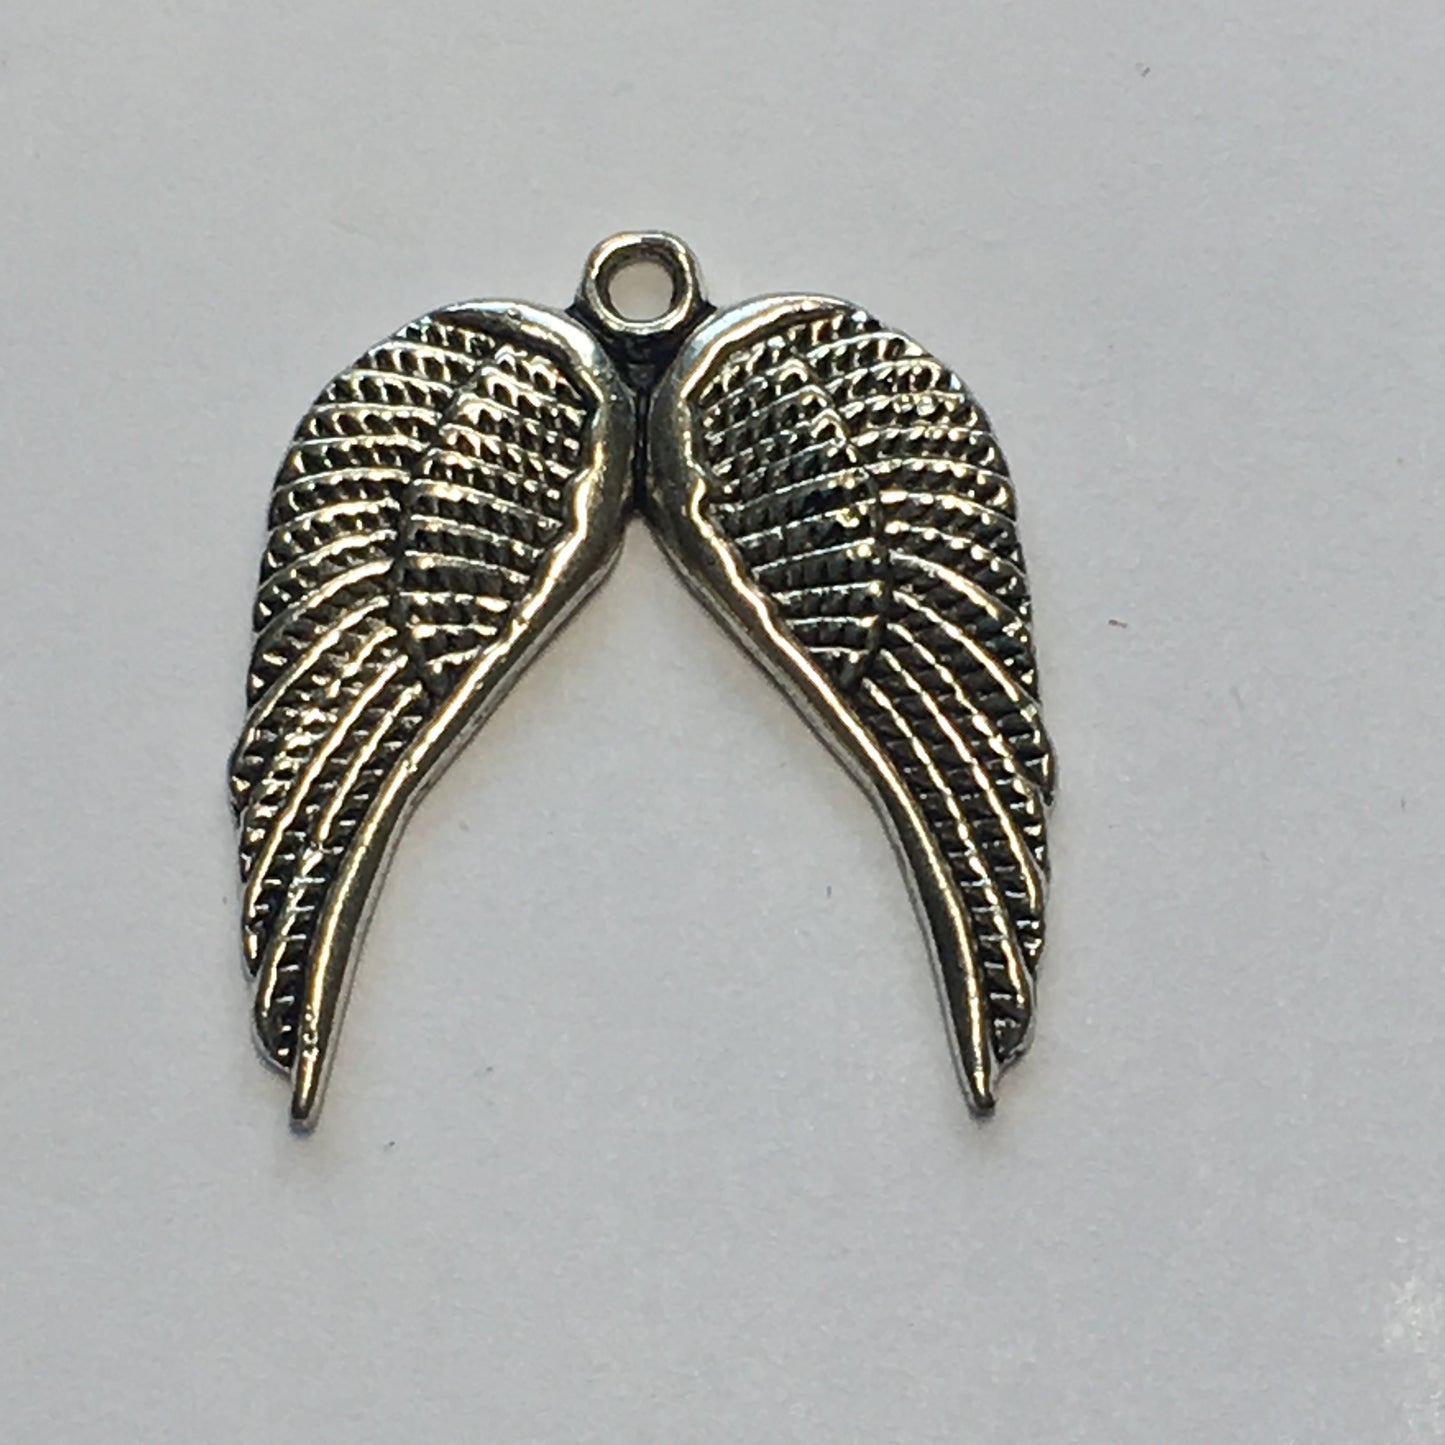 Antique Silver Angel's Wings Charm, 21 x 19 mm